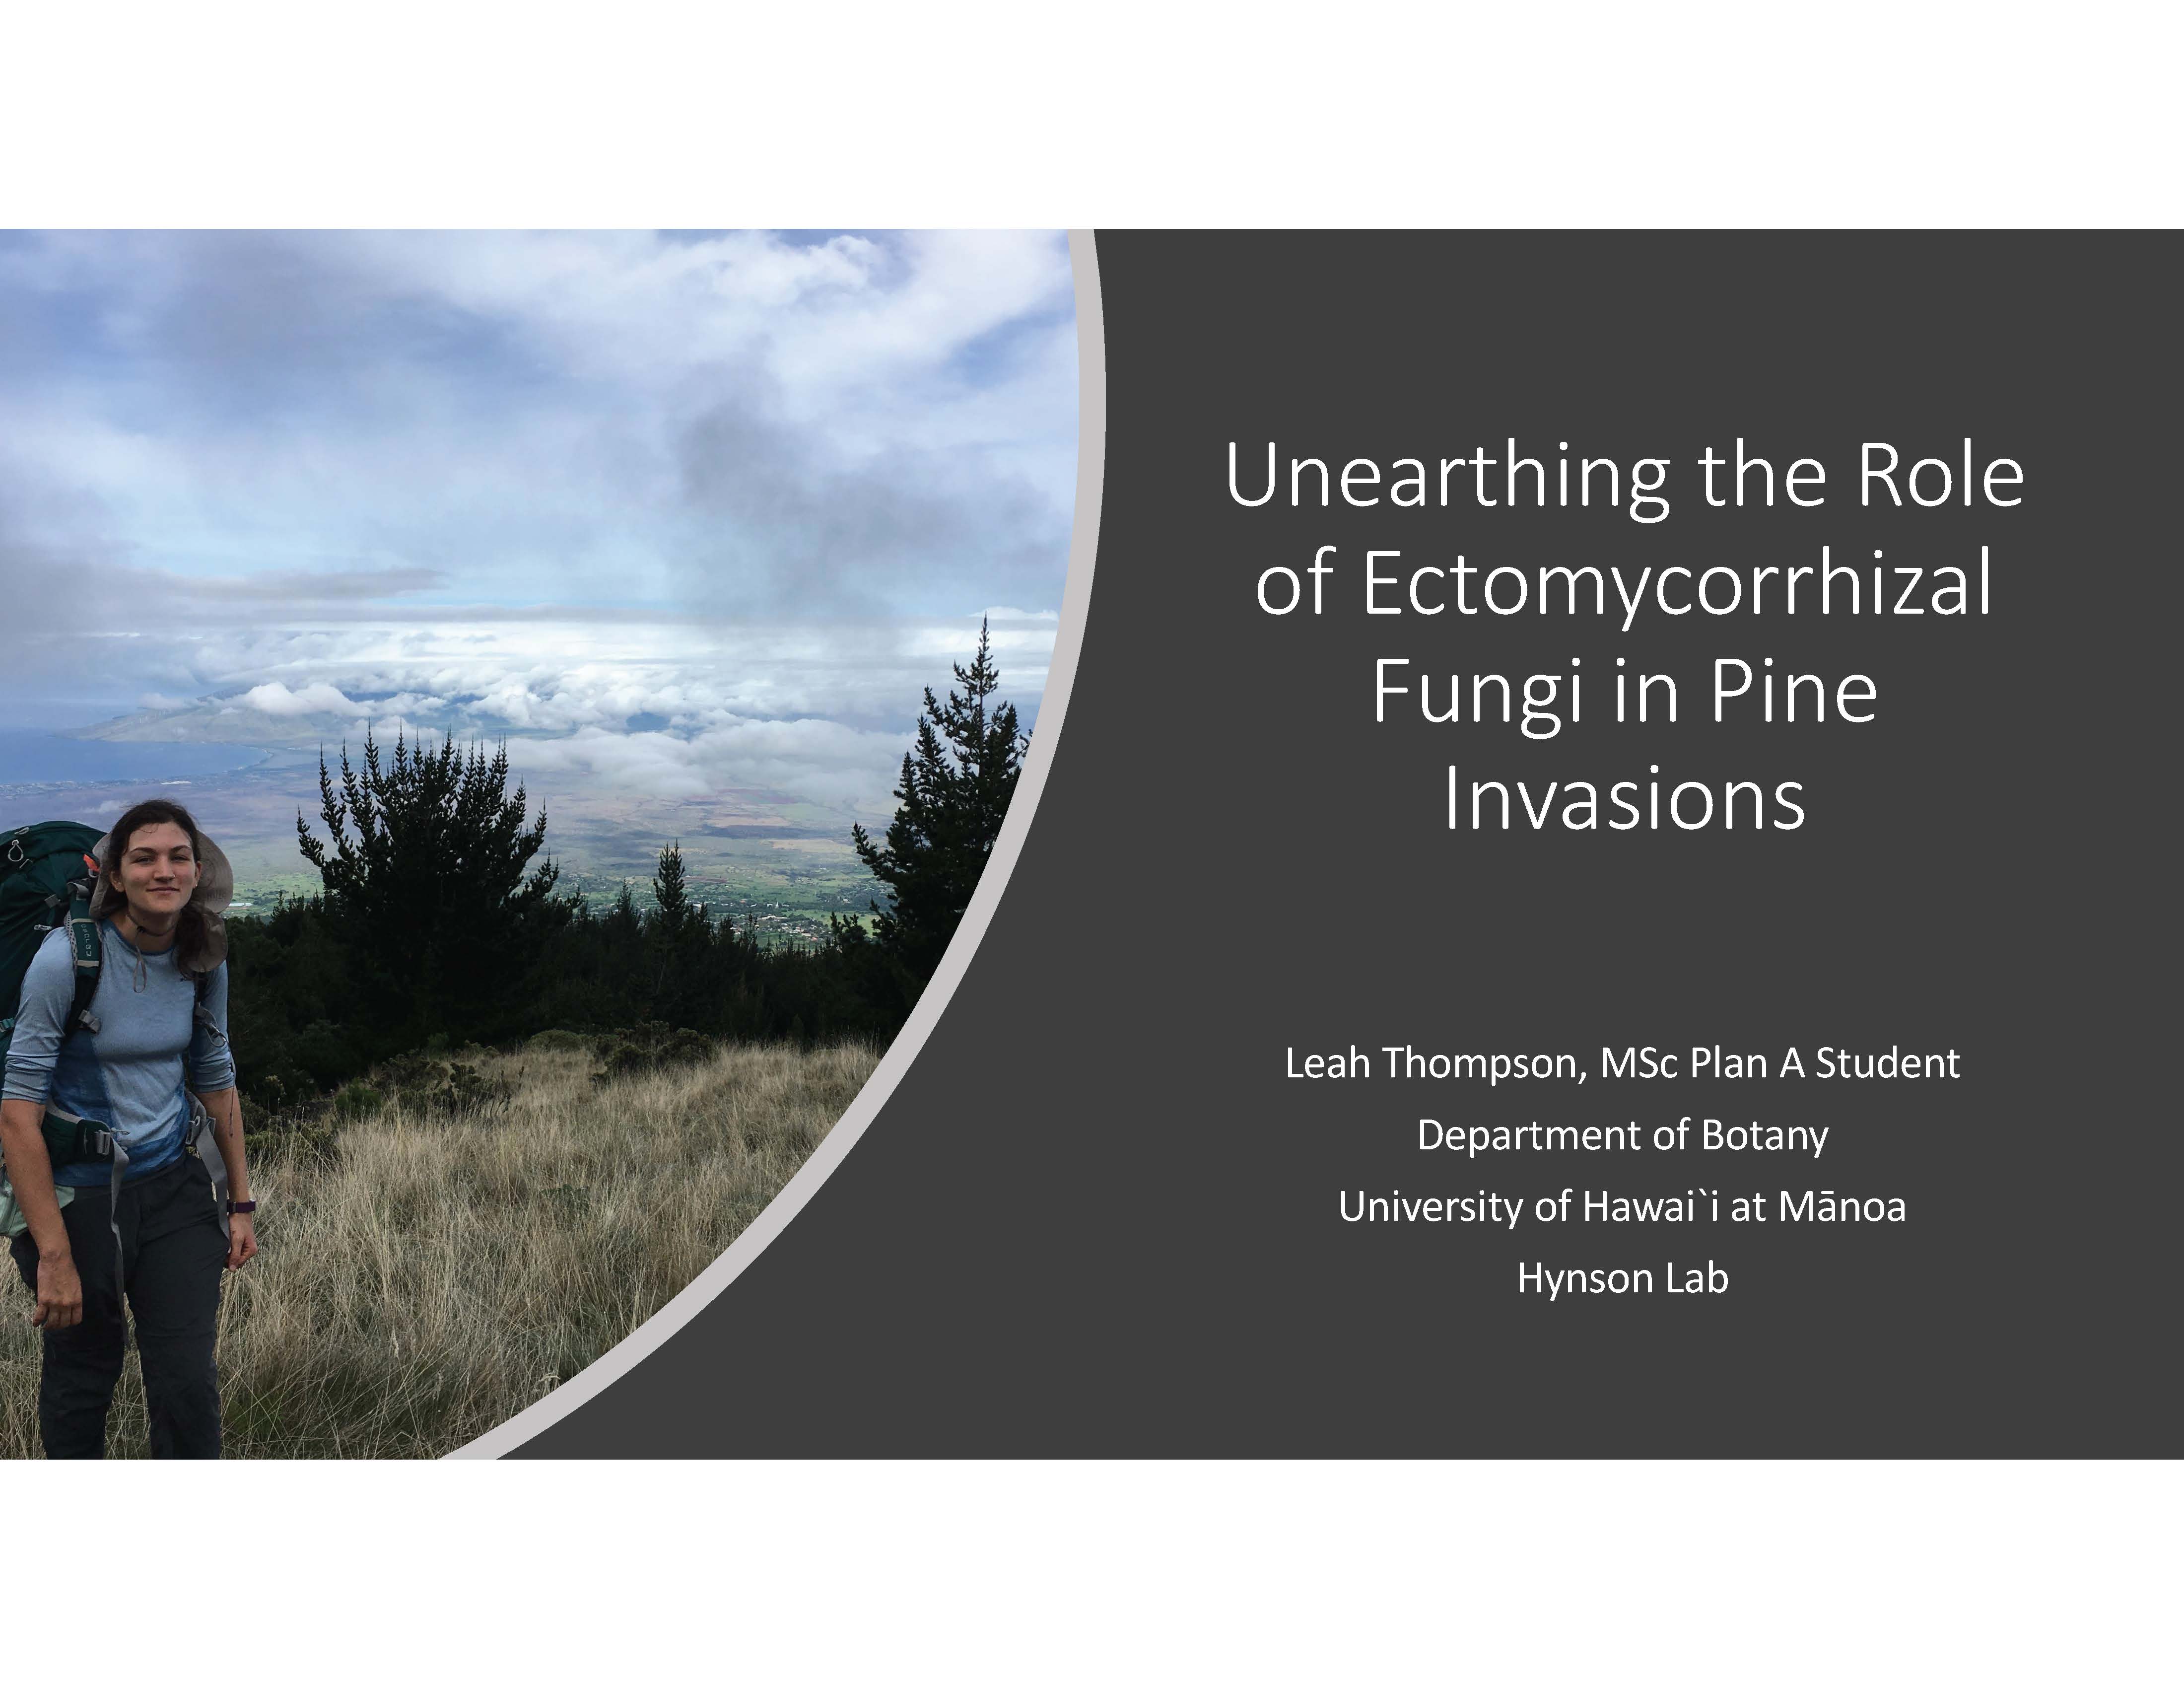 Congrats to Lab Member Leah Thompson for her successful presentation at the Botany Graduate Symposium!